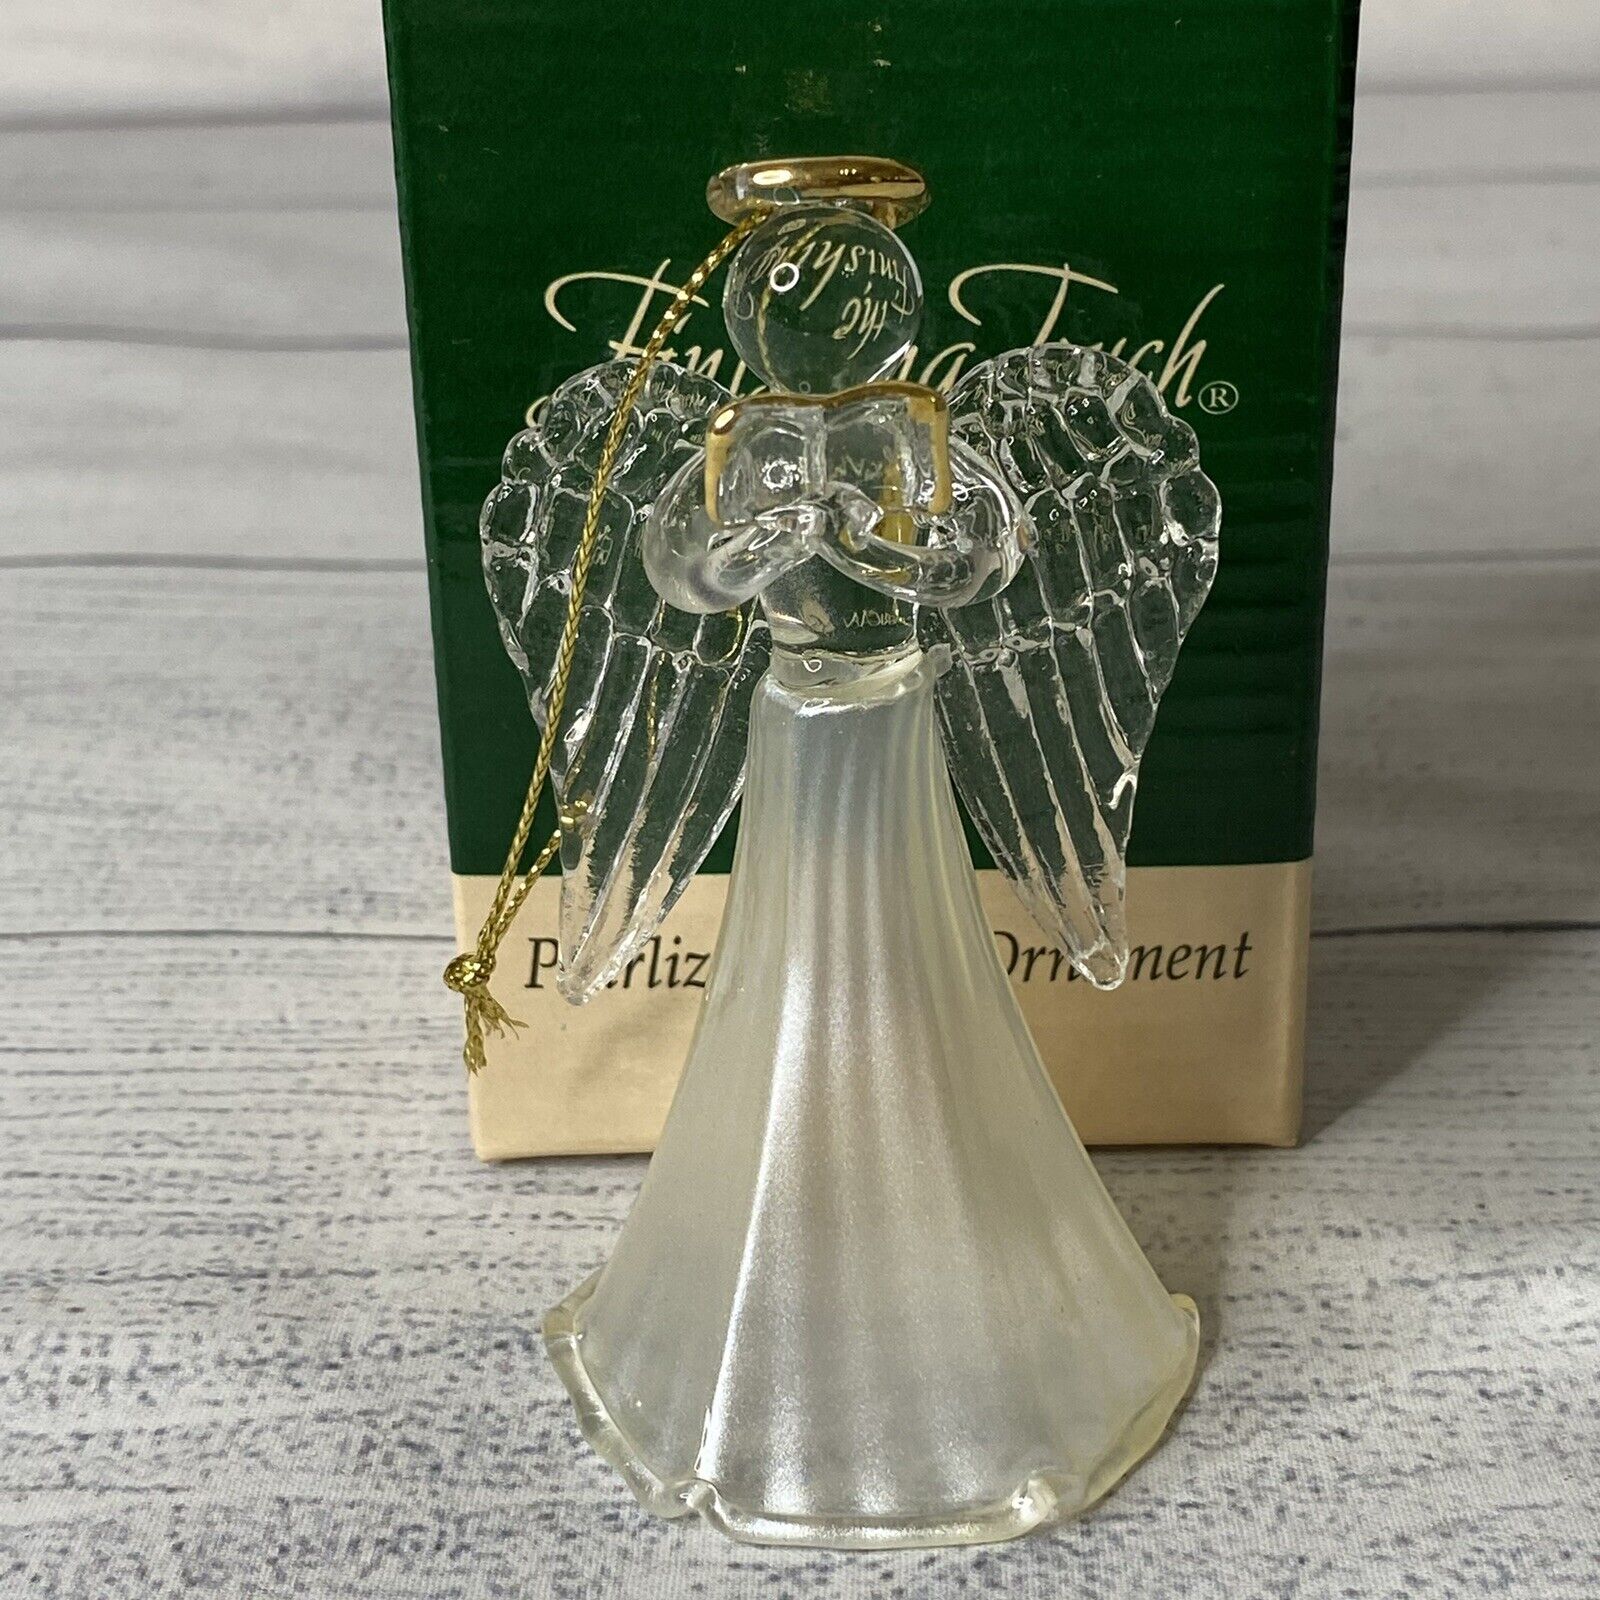  American Greeting Glass Pearlized Angel w/ Songbook Ornament Finishing Touch